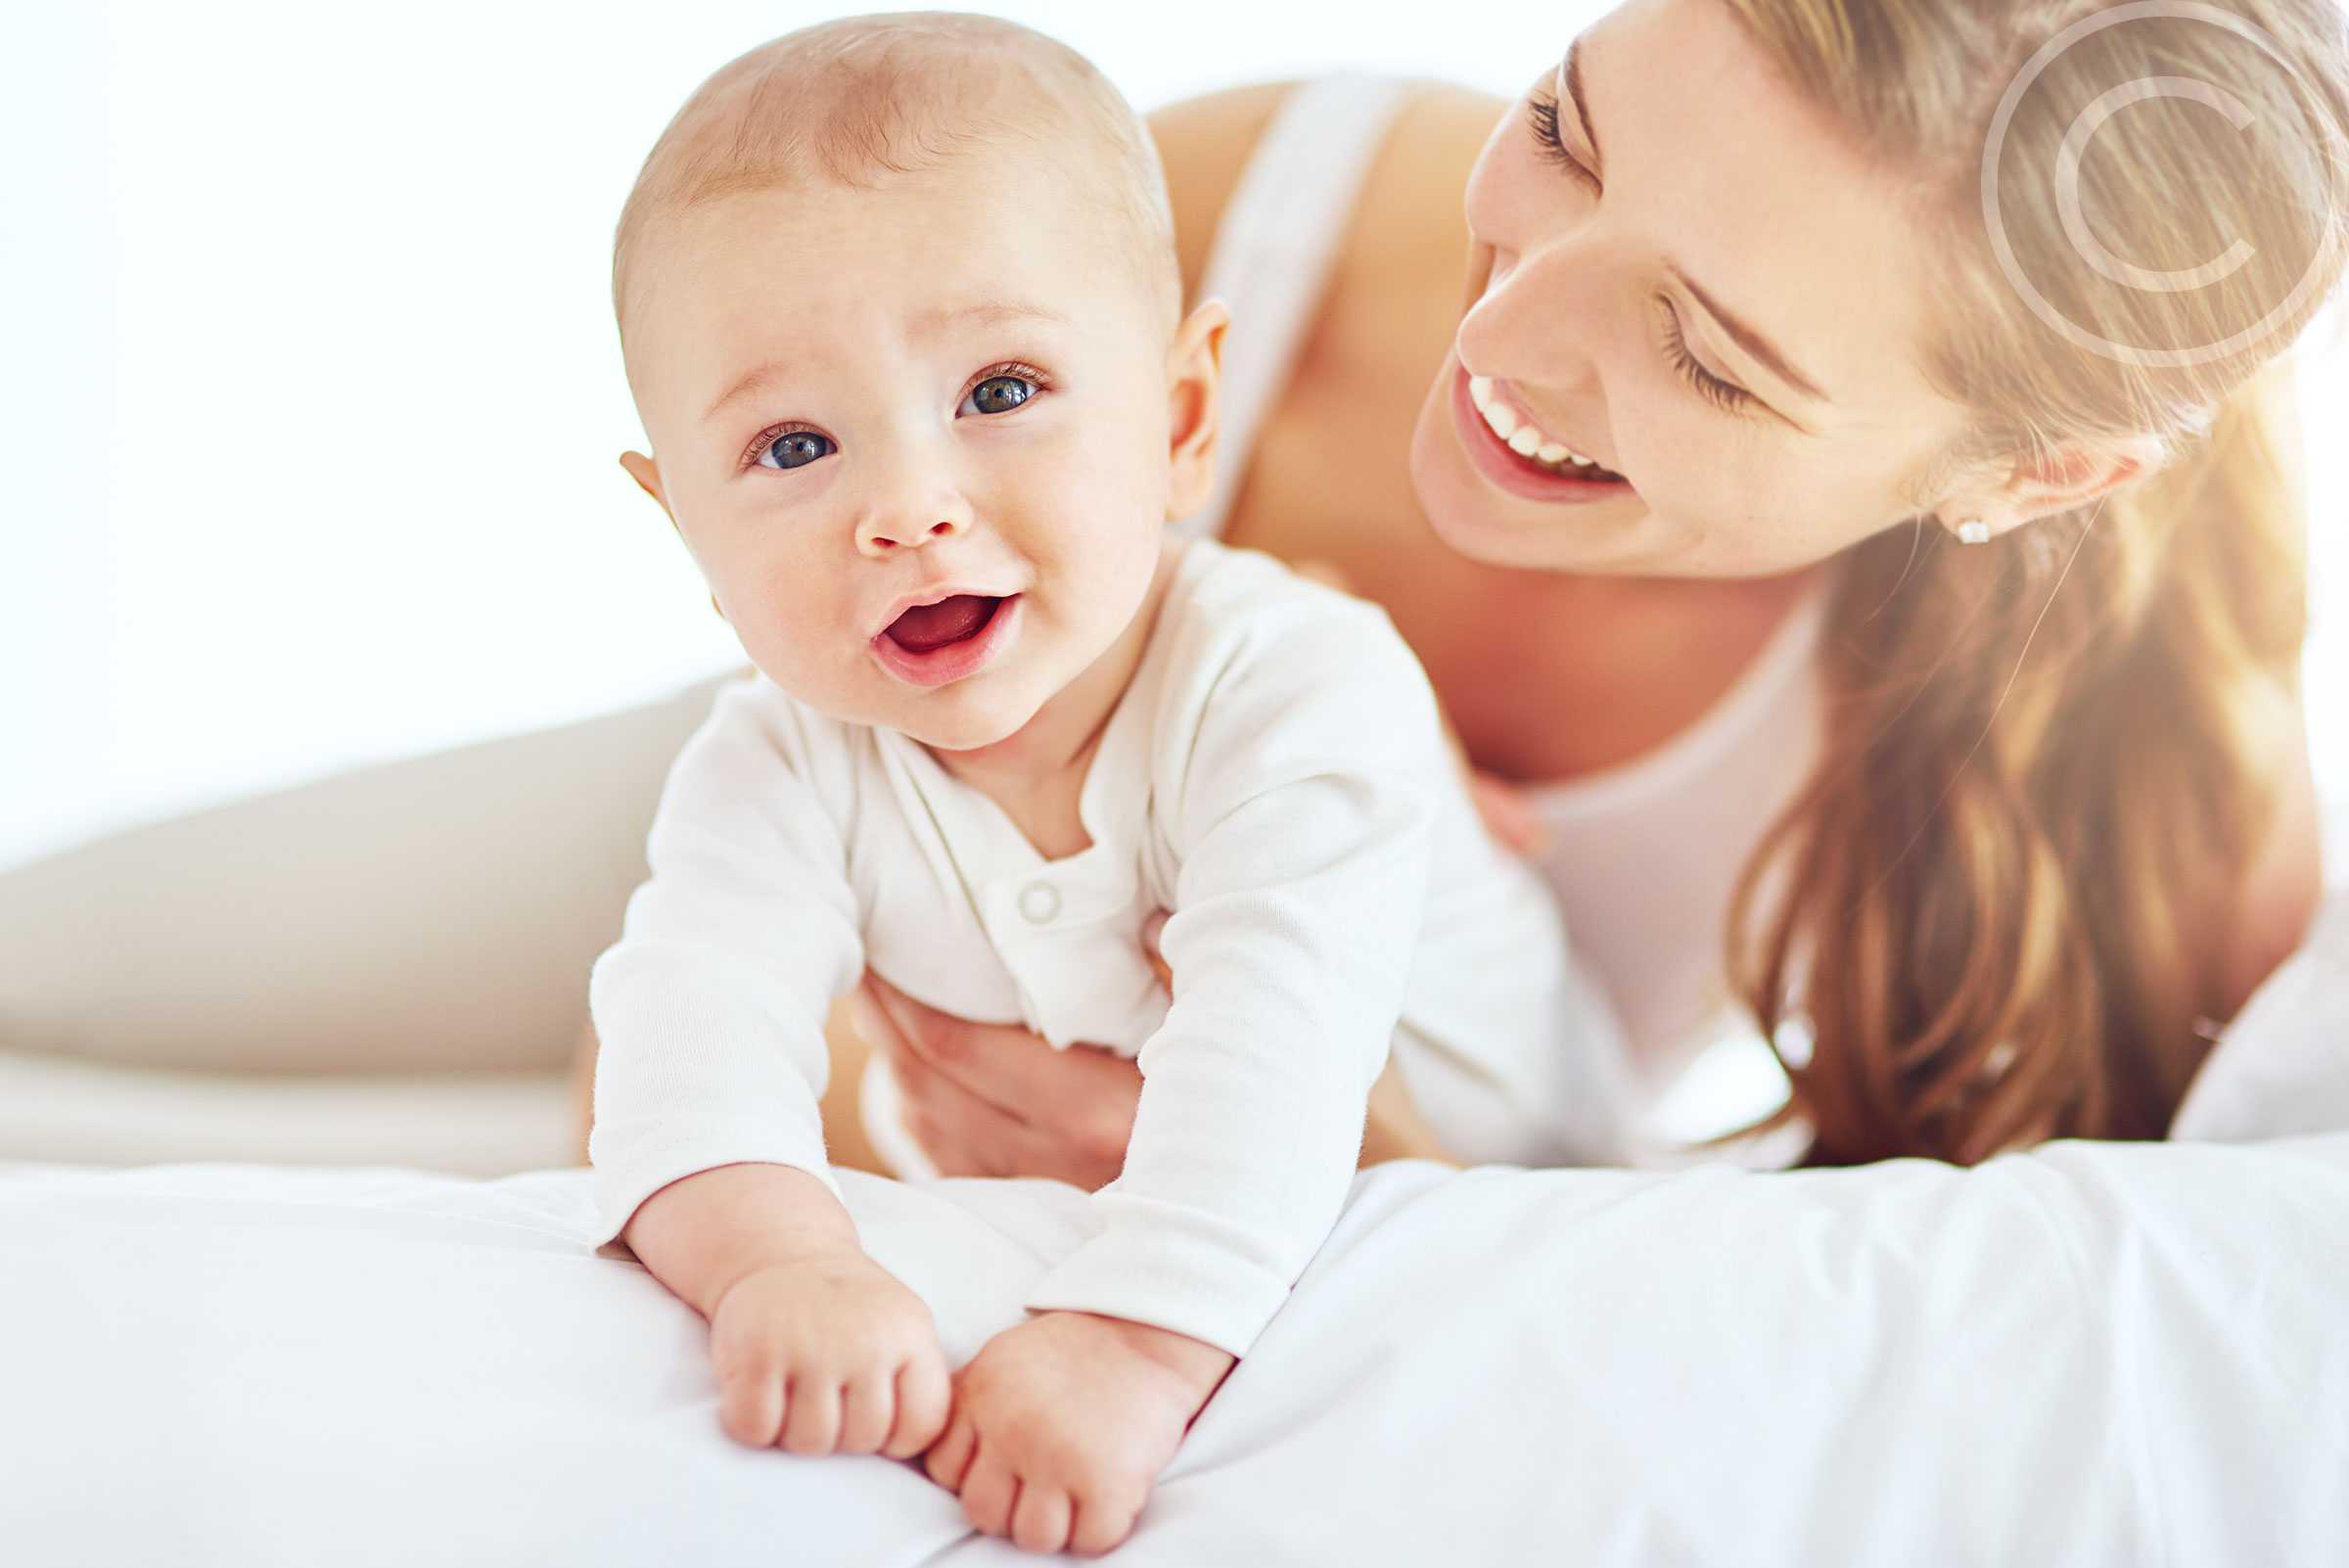 Top List of Premium Baby Care Products